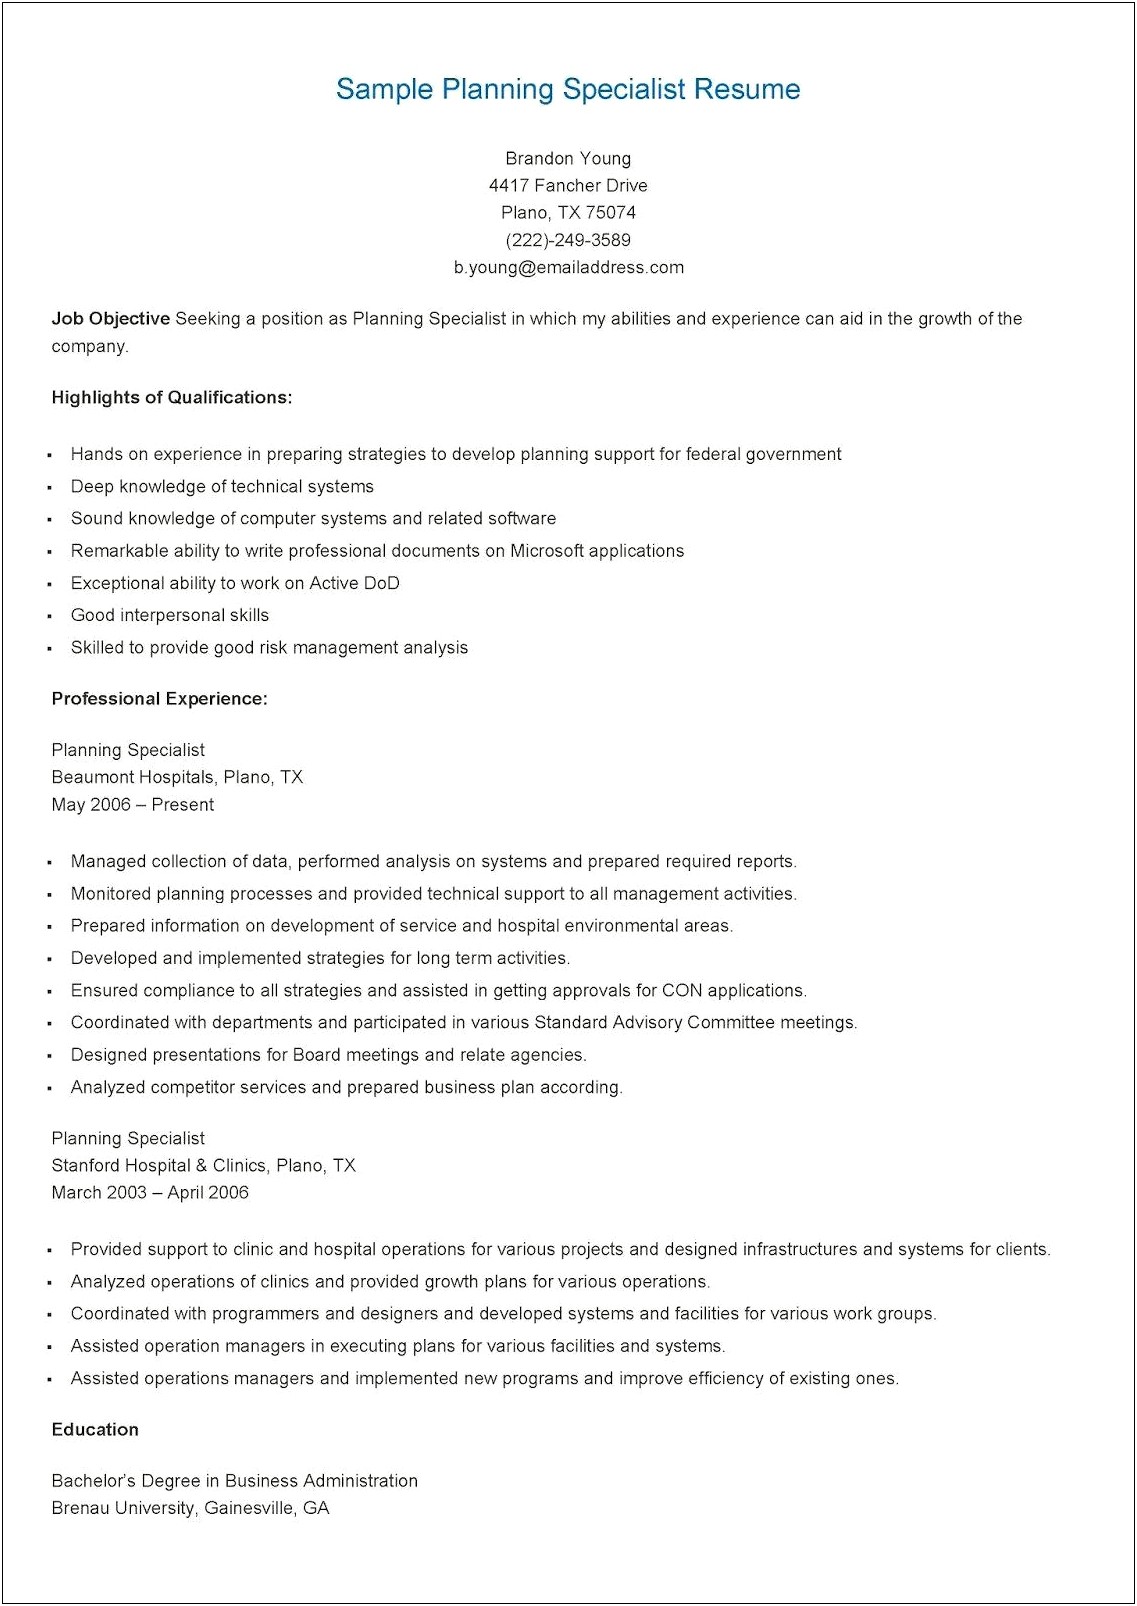 Sample Federal Human Resources Specialist Resume